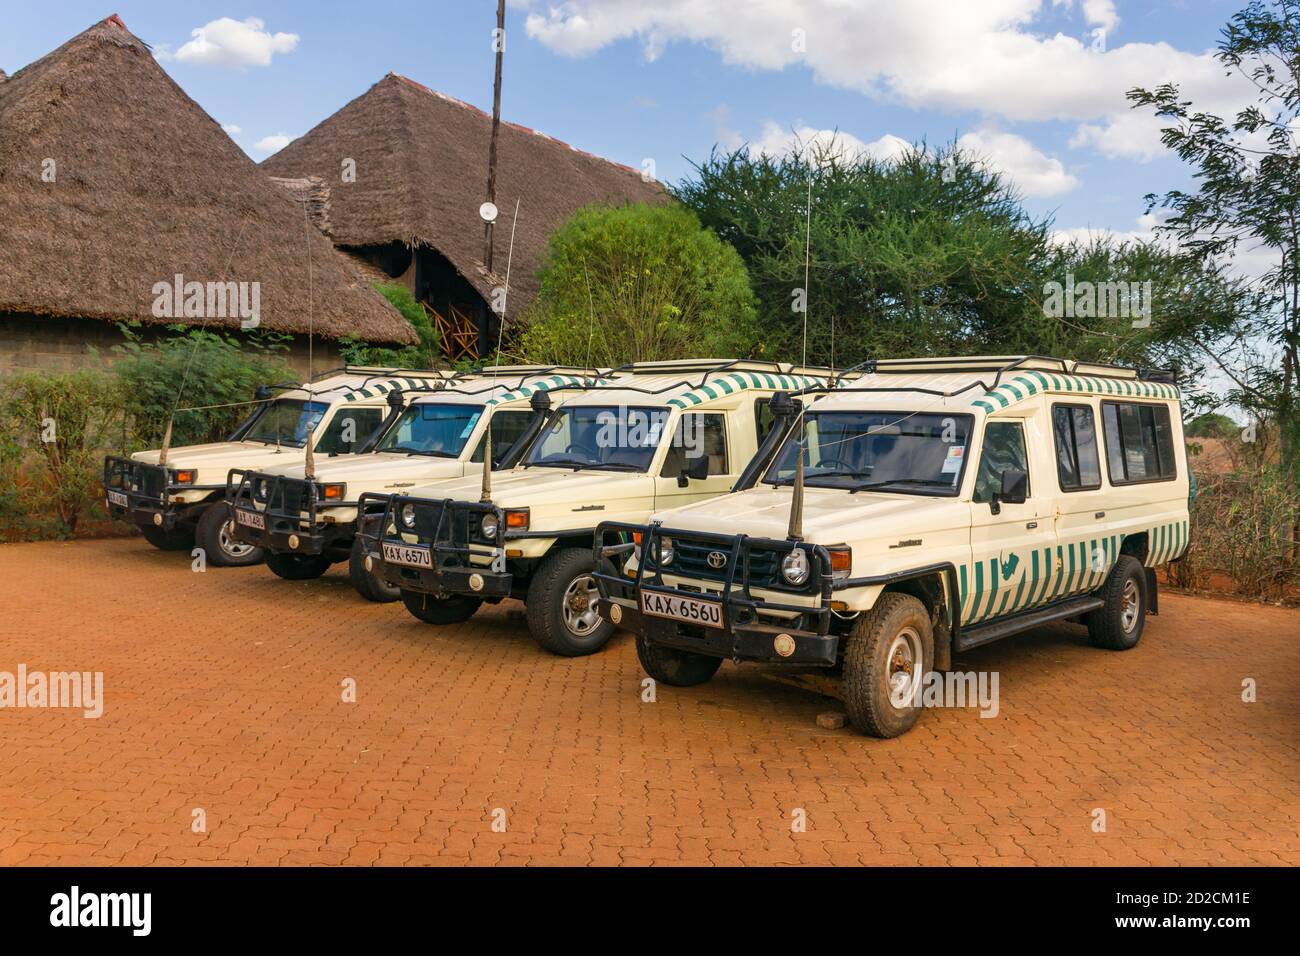 Several empty Toyota Landcruiser 4x4 offroad safari vehicles parked at a game lodge due to lack of tourists, Kenya, East Africa Stock Photo